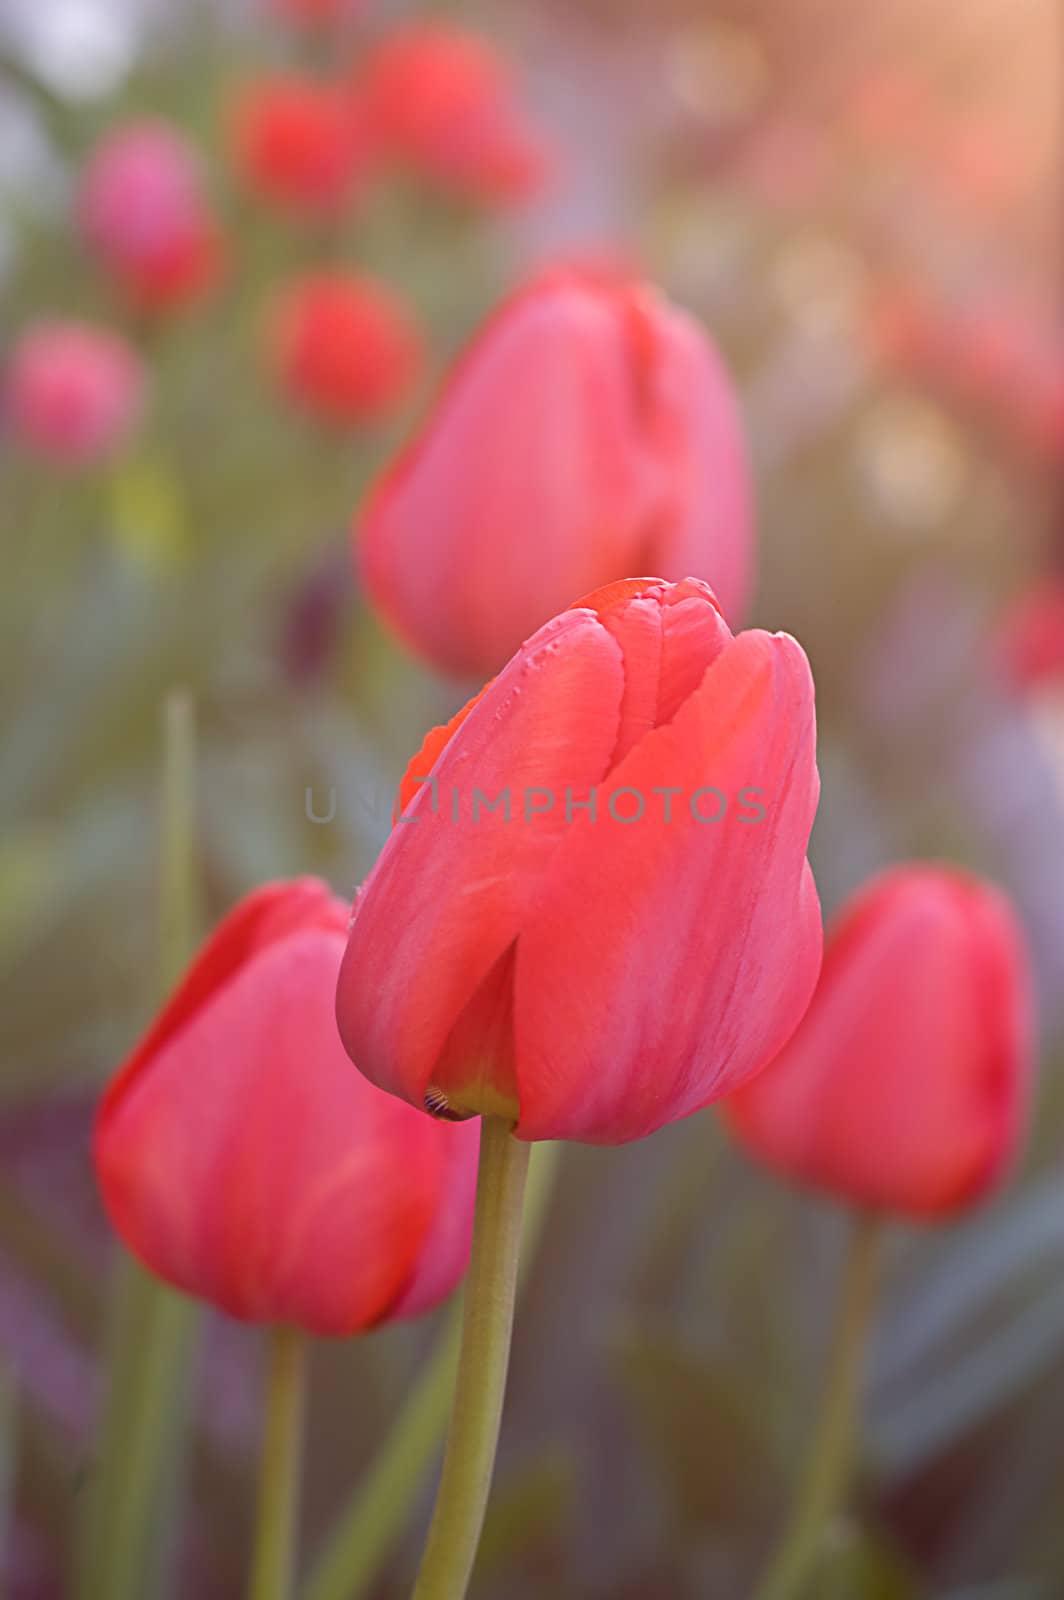 Tulips under sunset light by Angel_a